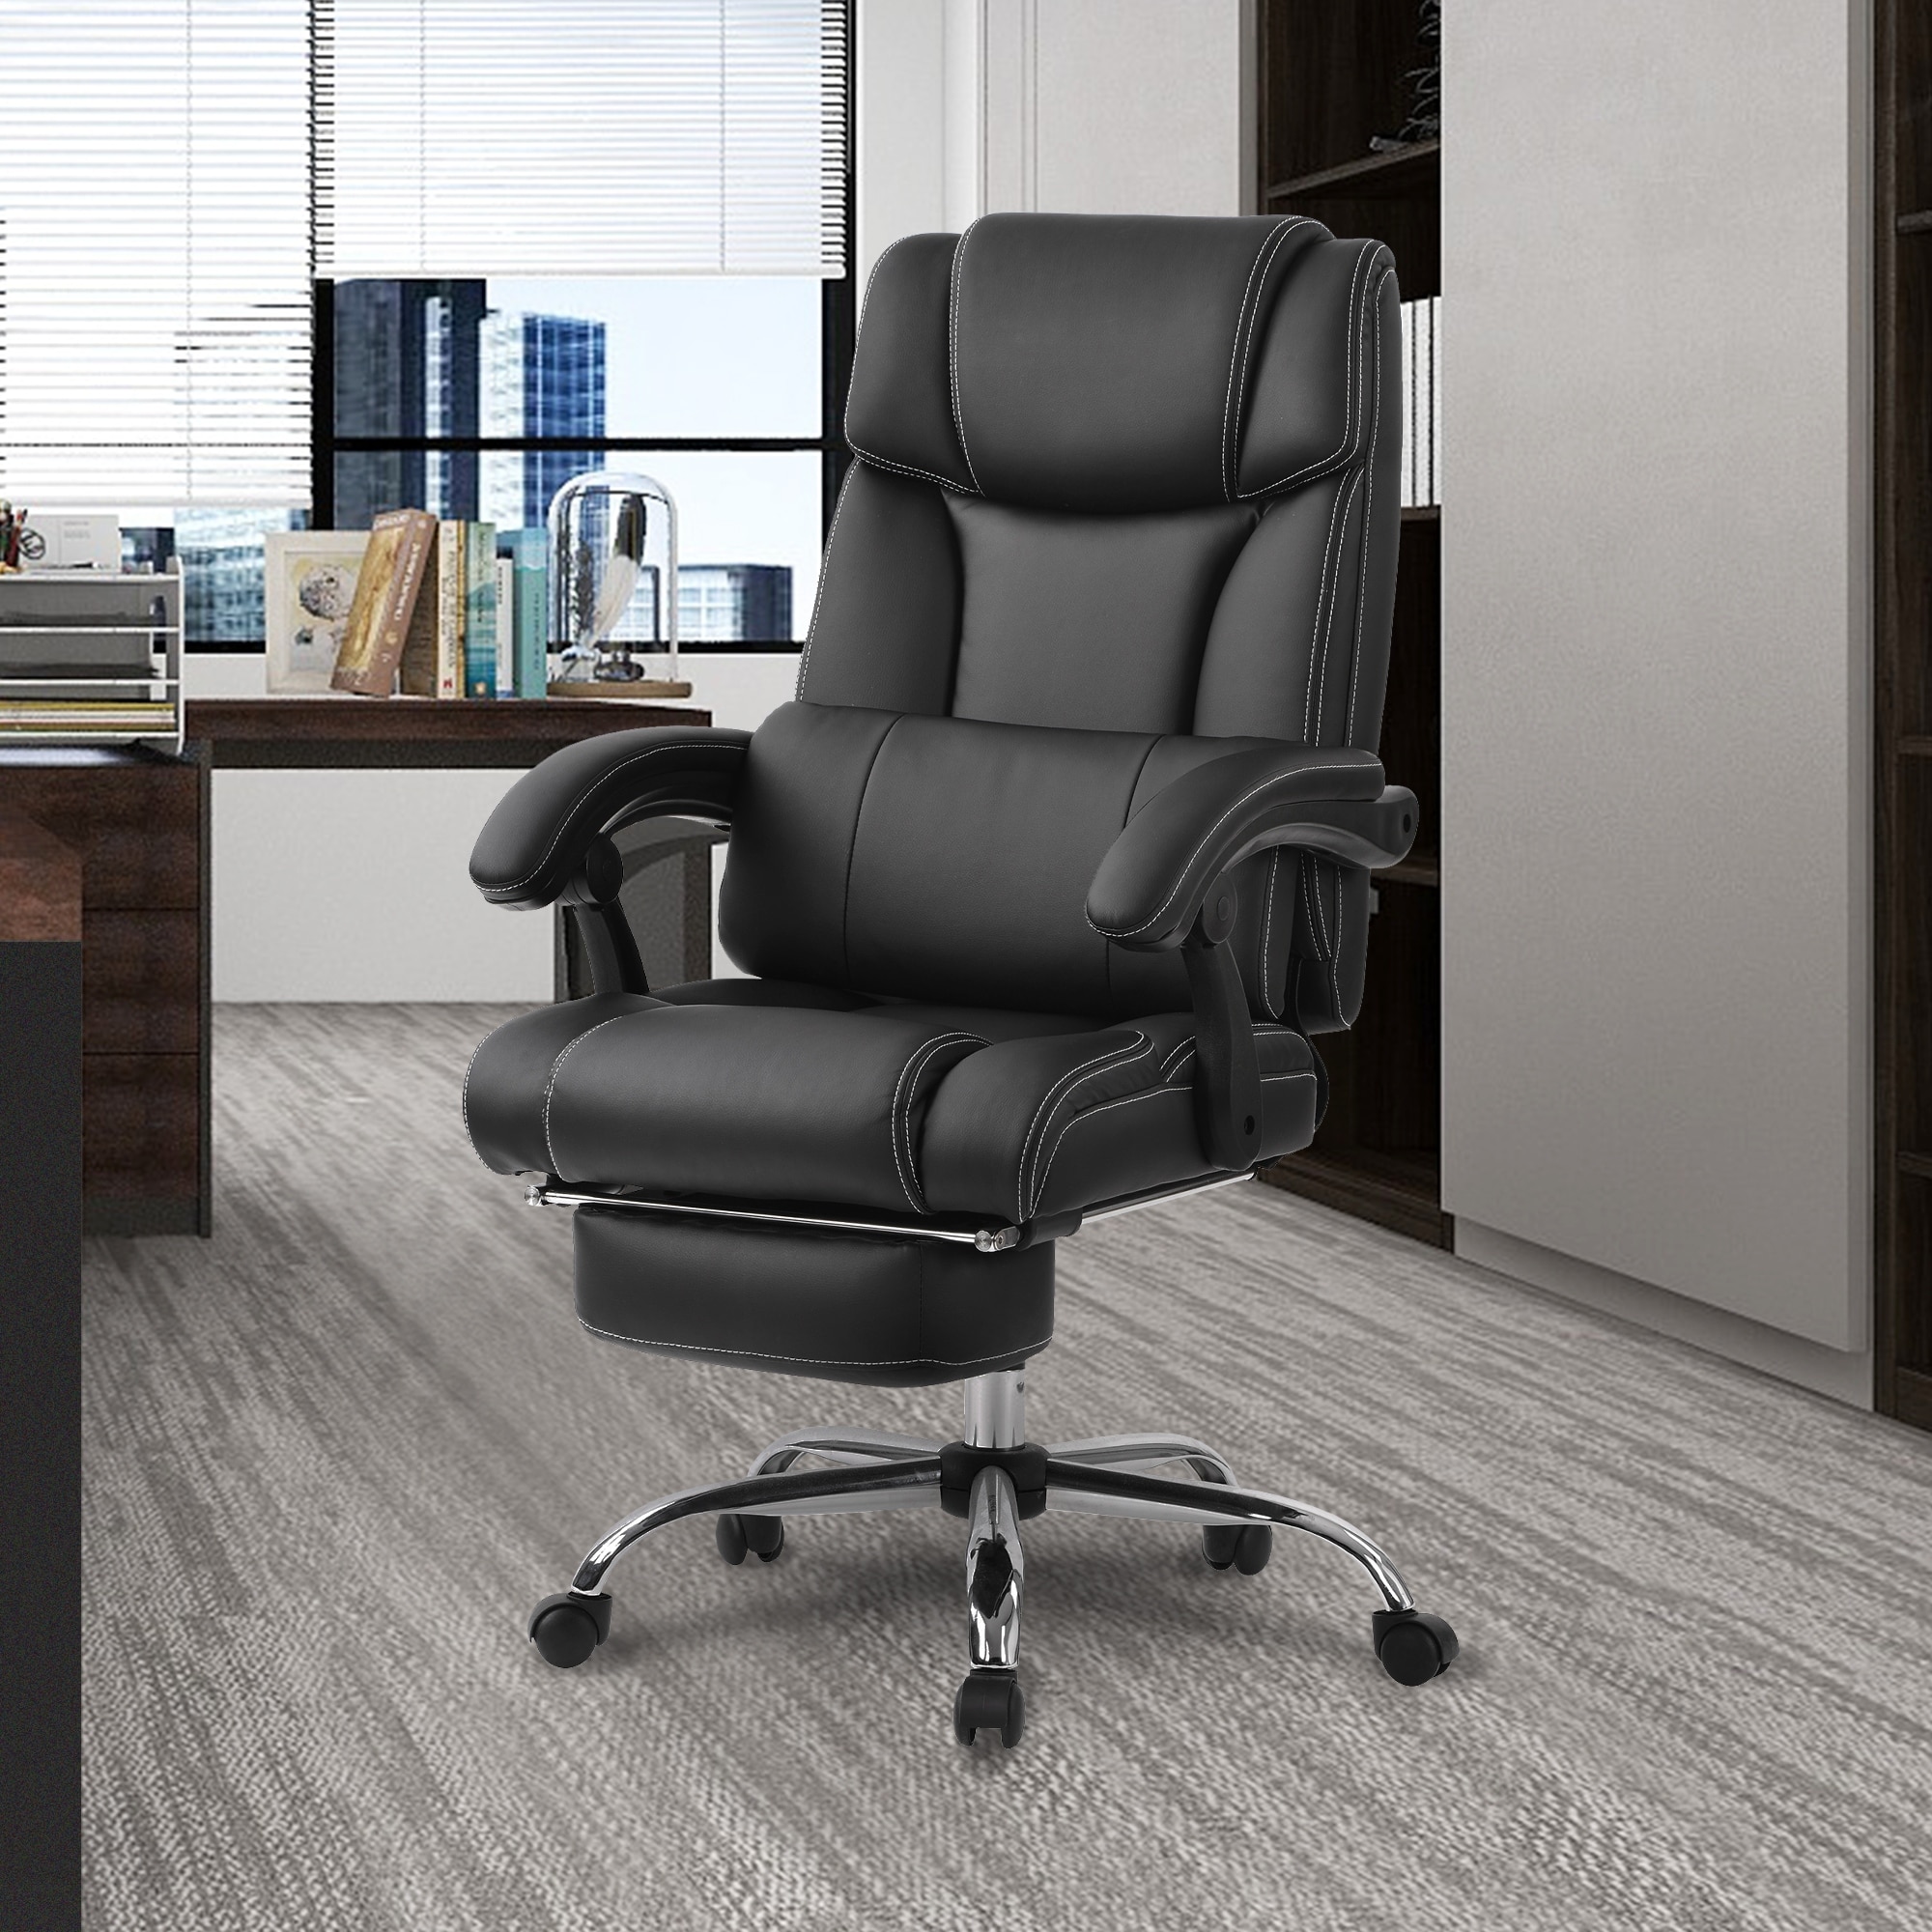 Vinsetto 484LBS Big and Tall Ergonomic Executive Office Chair with Wide  Seat, High Back Adjustable Computer Task Chair Swivel PU Leather, Black